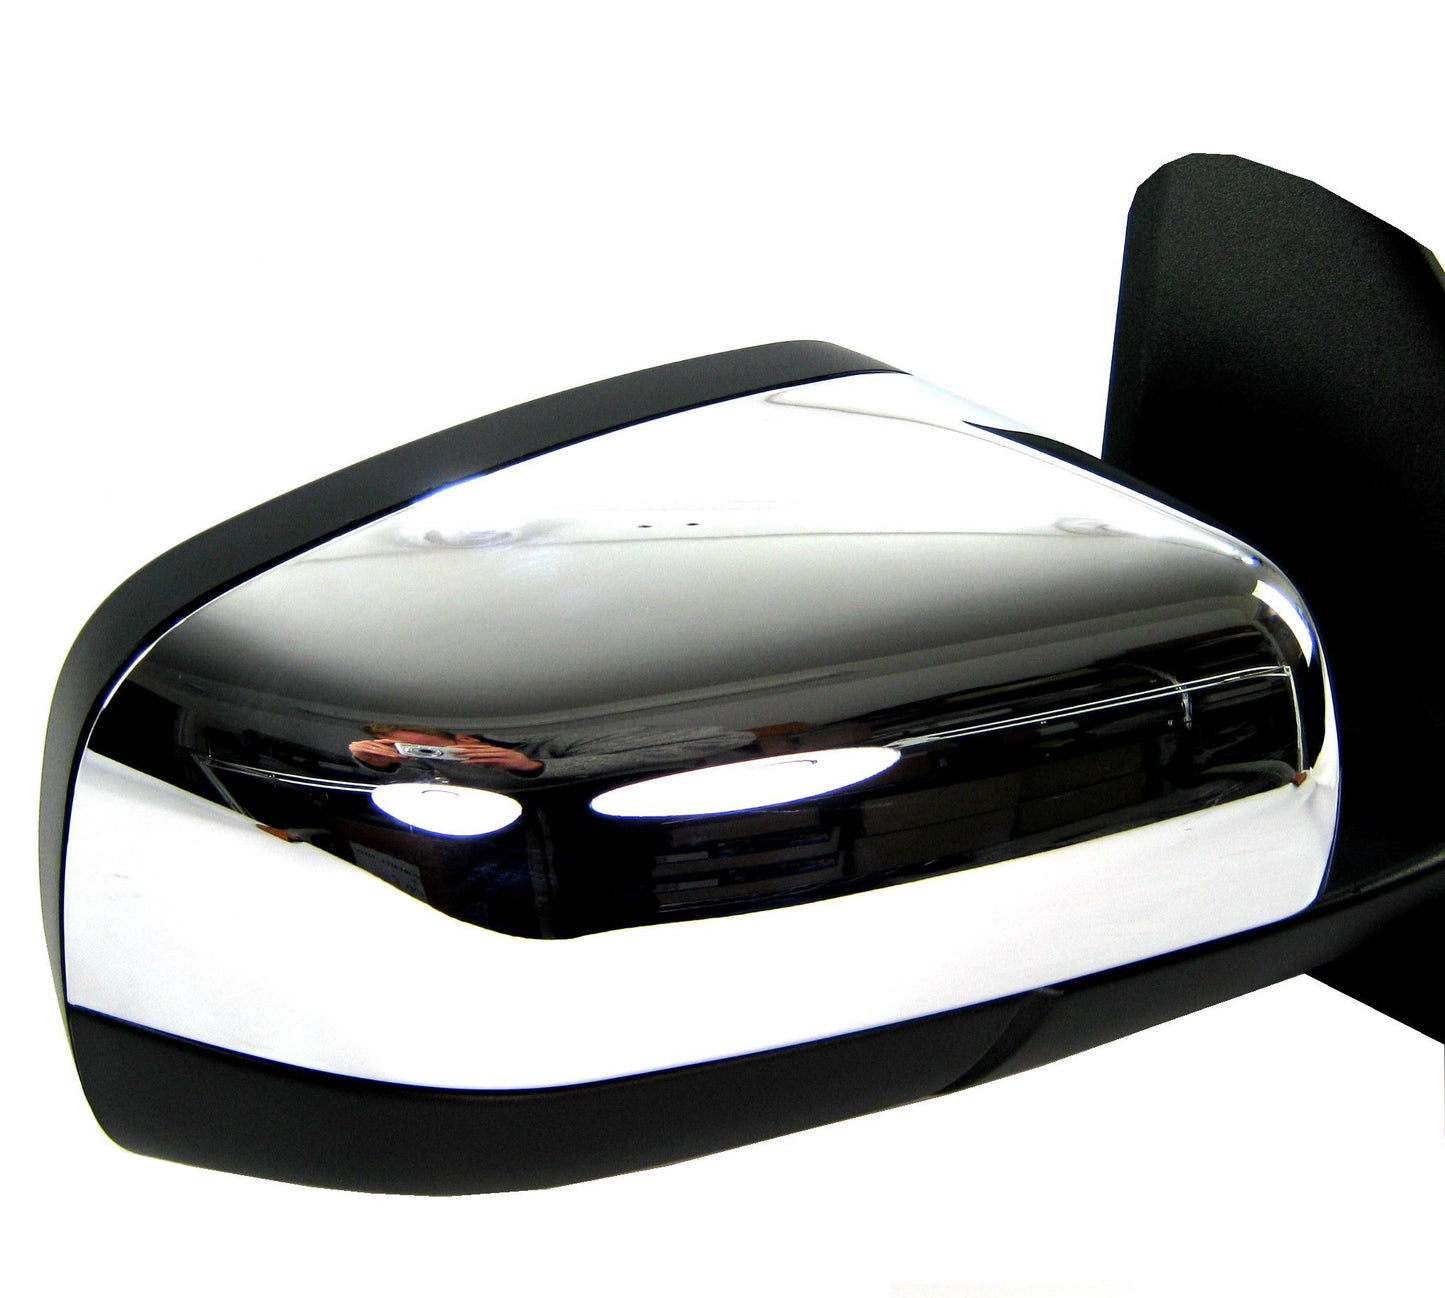 Replacement Top Mirror Caps for Land Rover Discovery 4 - Chrome